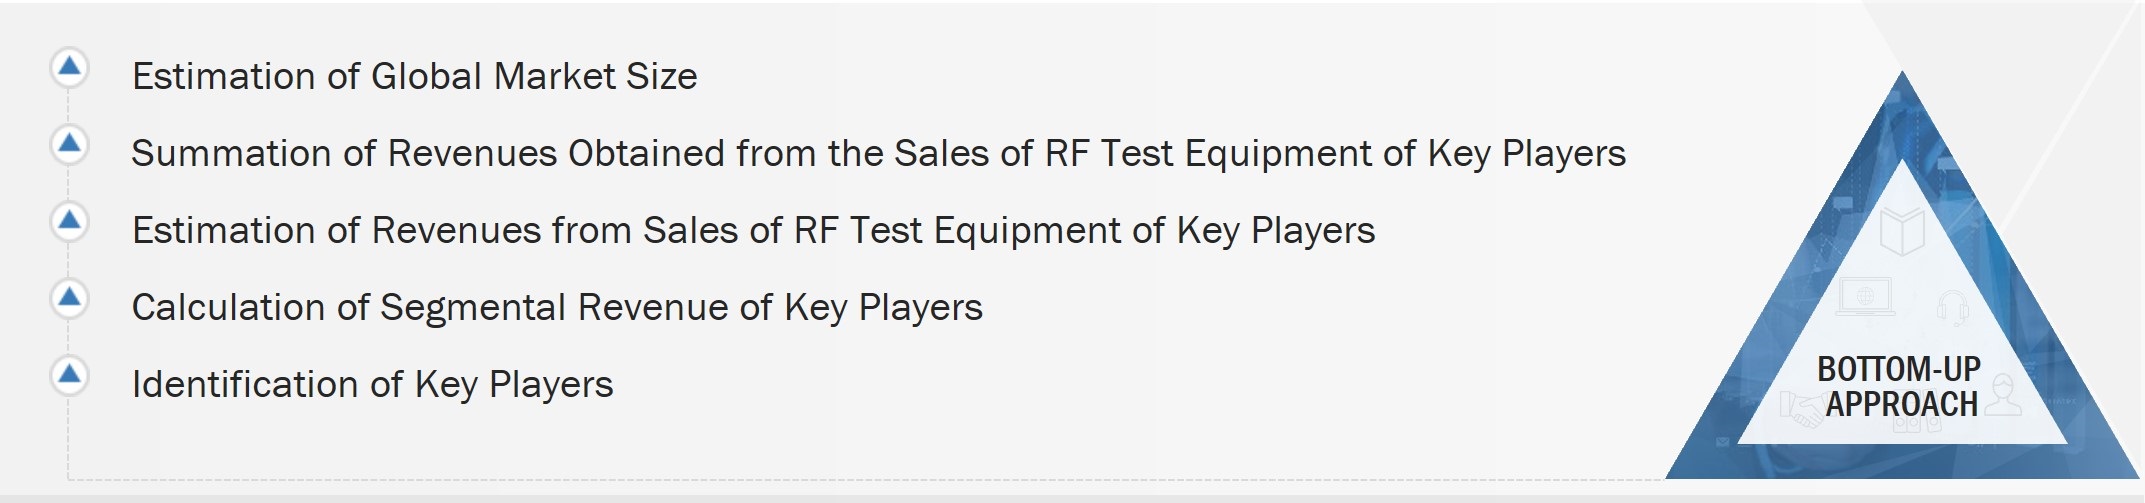 RF Test Equipment Market Size, and Bottom-up approach 